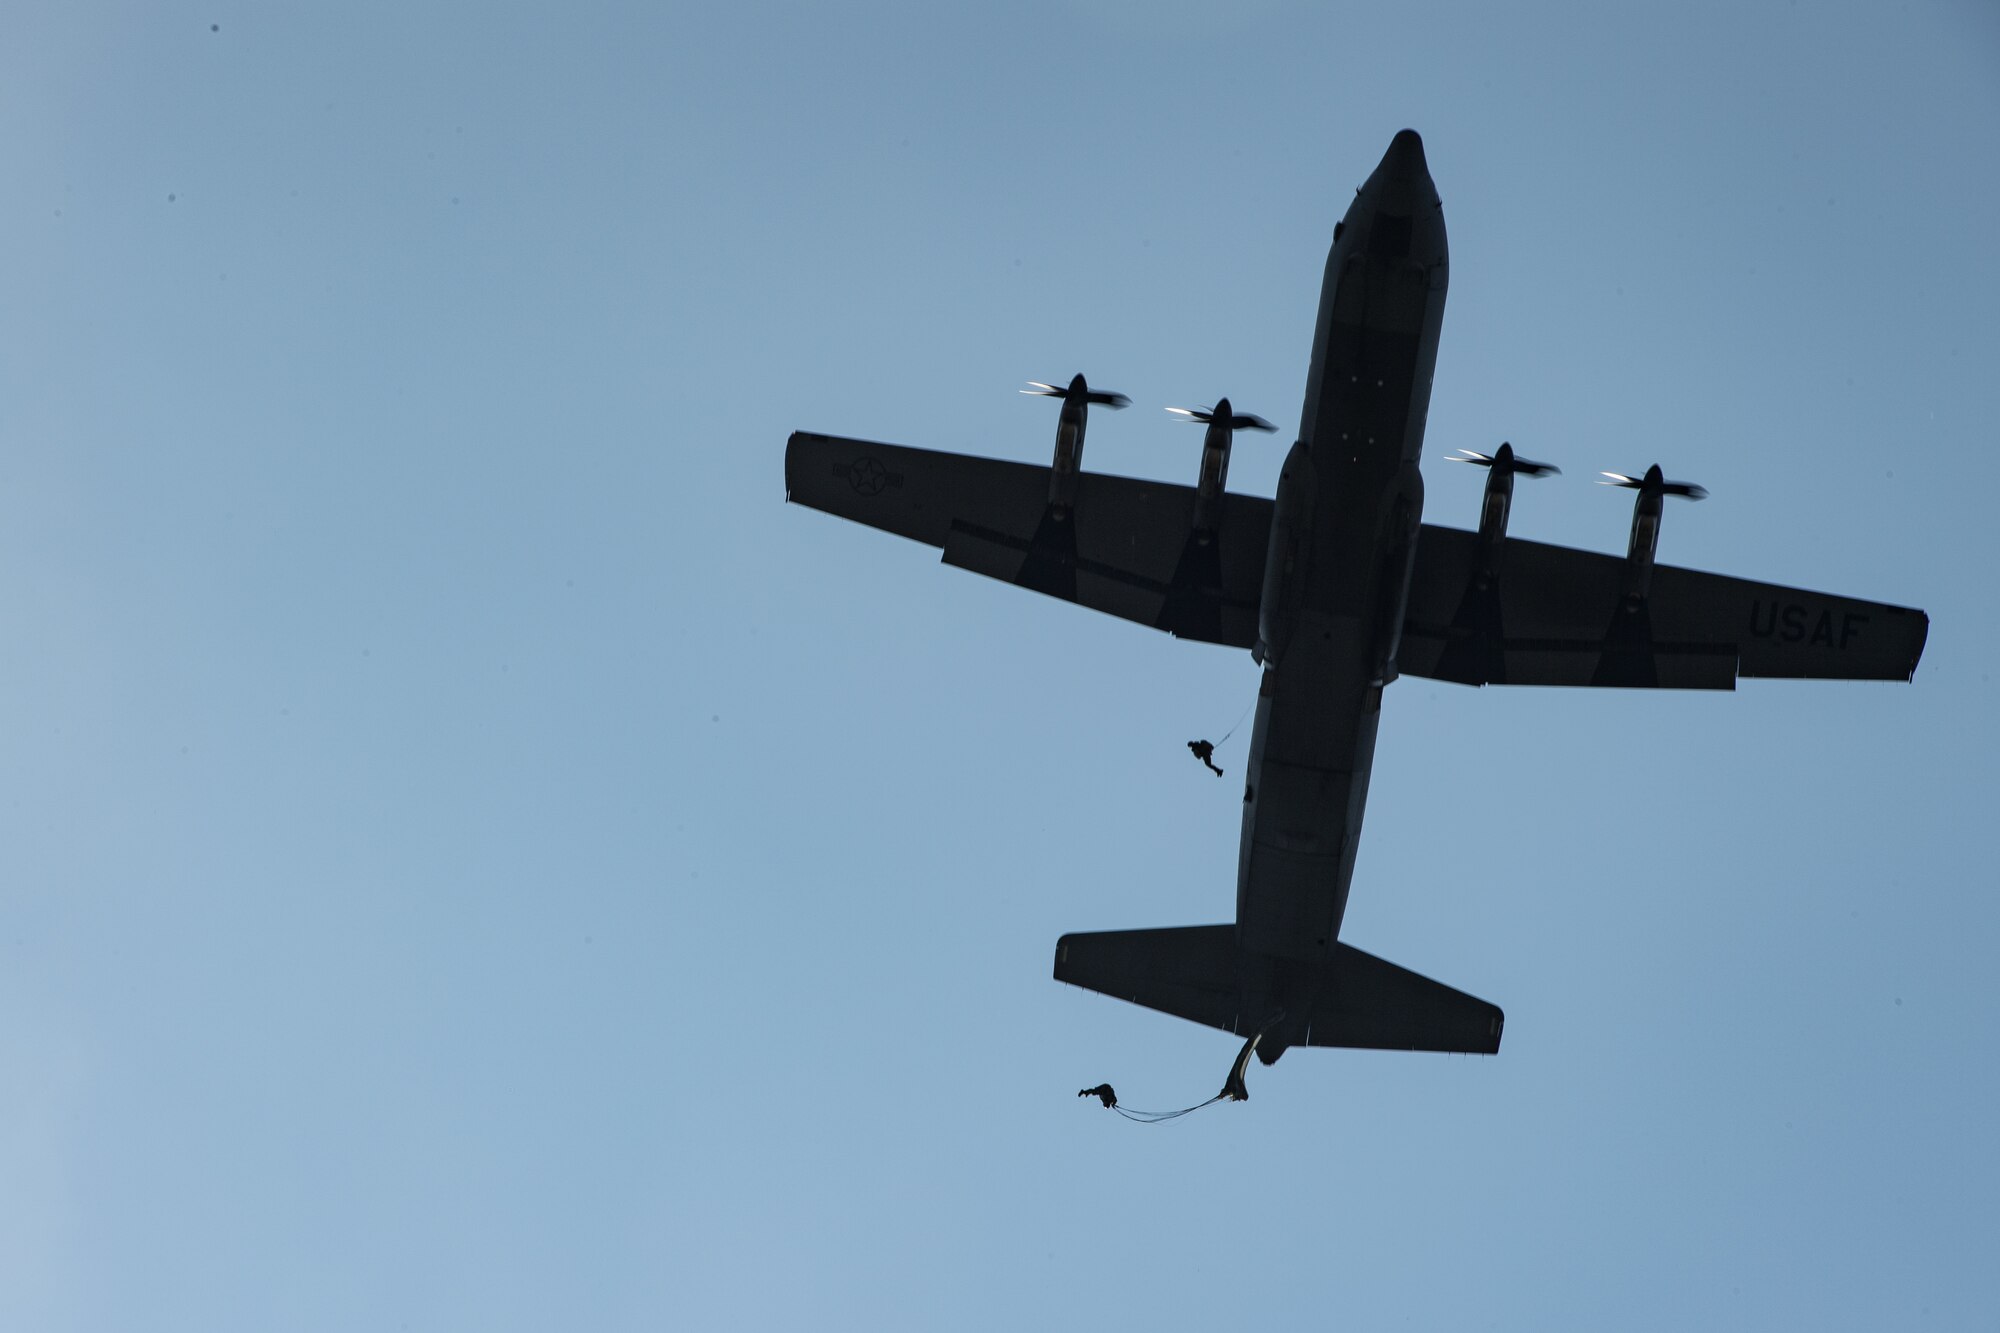 Romanian air force paratroopers jump out of a U.S. Air Force C-130J Super Hercules aircraft assigned to the 37th Airlift Squadron, Ramstein Air Base, Germany, over Boboc Air Base, Romania, Aug. 23, 2018. The airdrops were part of exercise Carpathian Summer 2018, a bilateral training exercise designed to enhance interoperability and readiness of forces by conducting combined air operations with the Romanian air force. (U.S. Air Force photo by Senior Airman Devin Boyer)